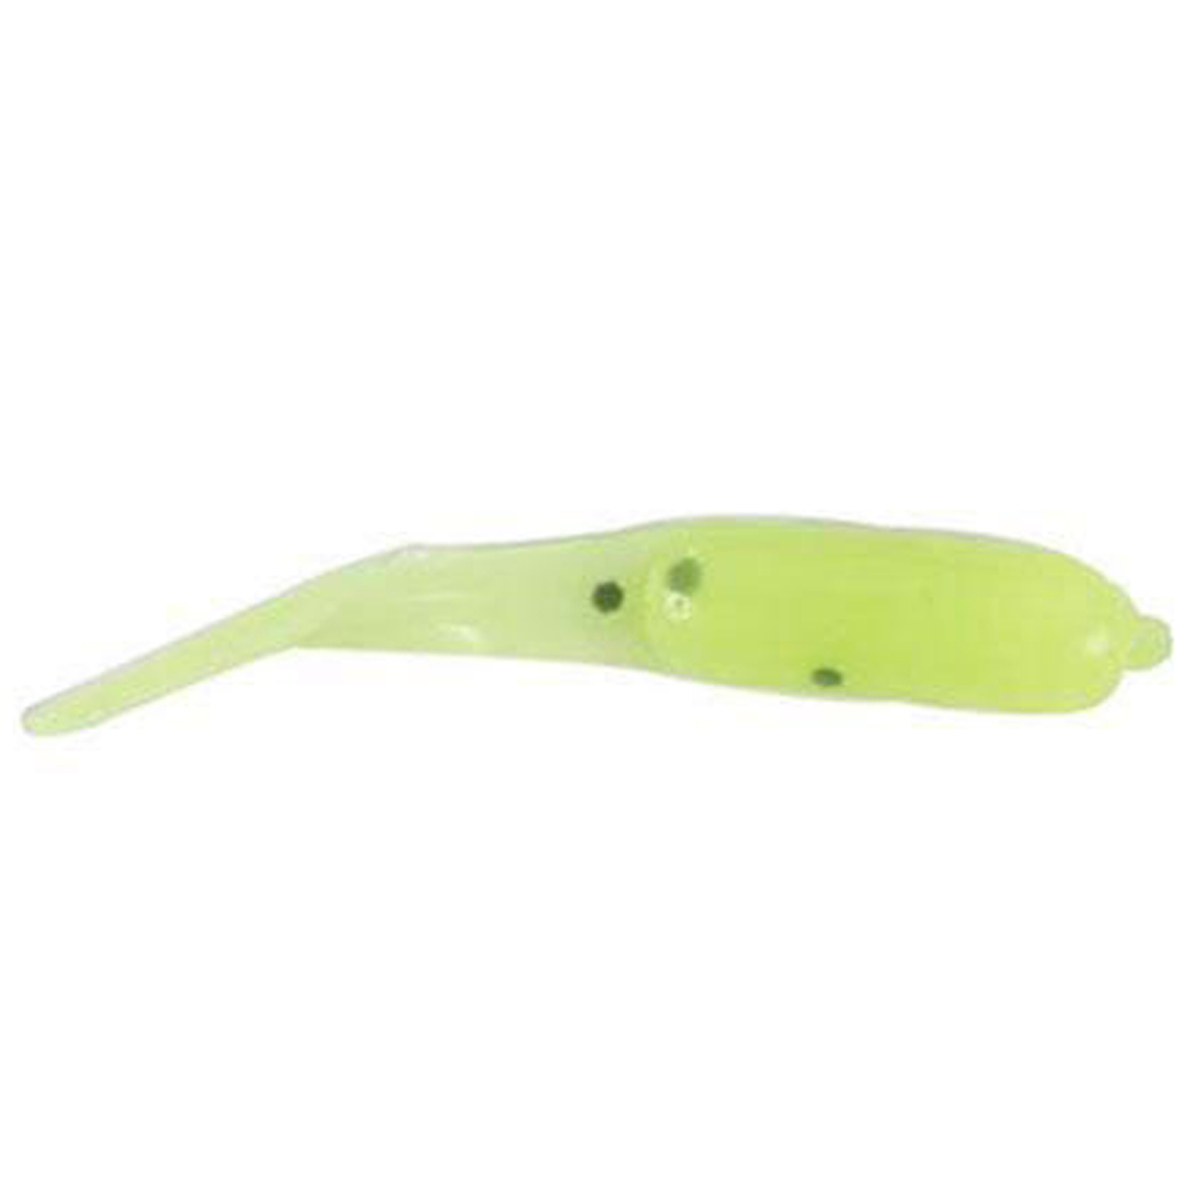 Fish Stalker 1-1/2in Slab Tail Panfish Jig - Ugly Green by Sportsman's Warehouse